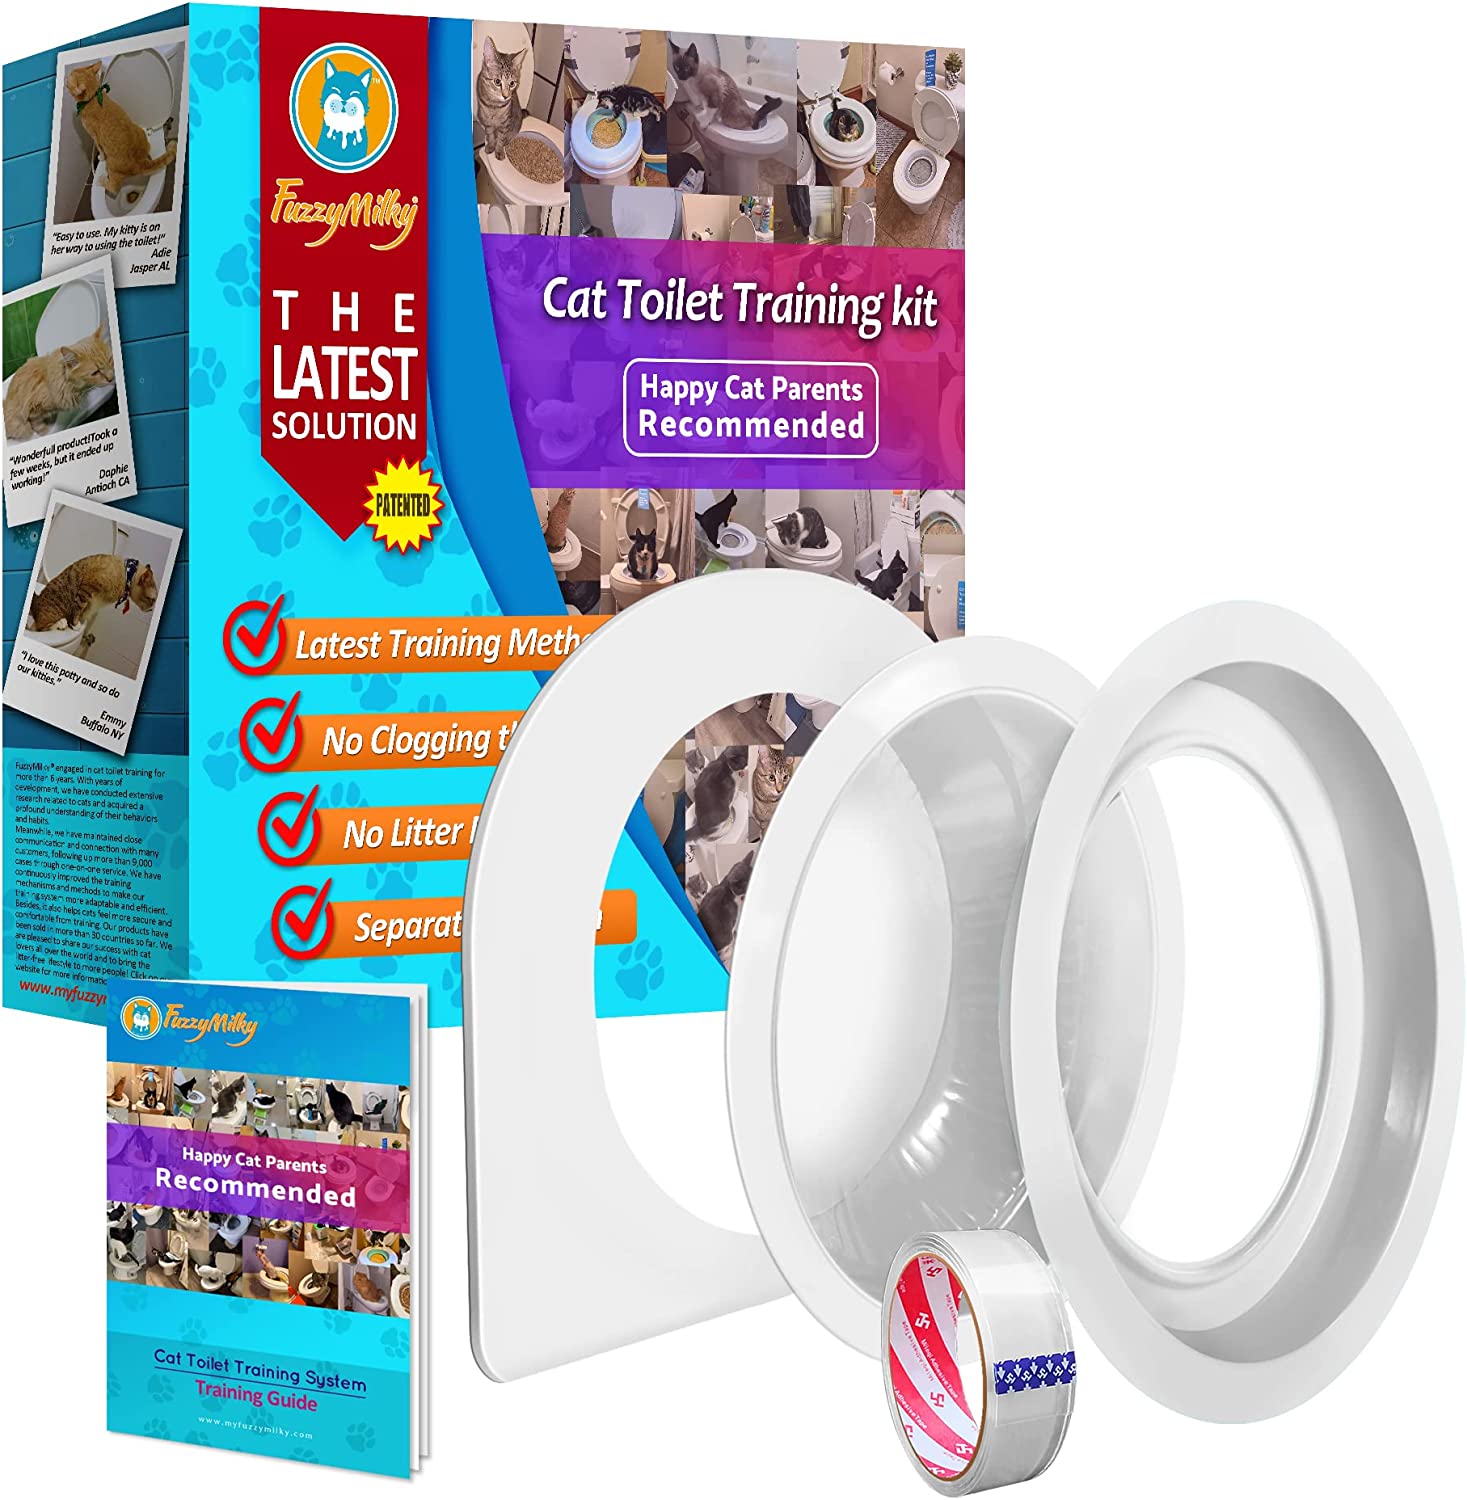 Fuzzymilky Cat Toilet Training System CM2 21% Off Now At $27.72